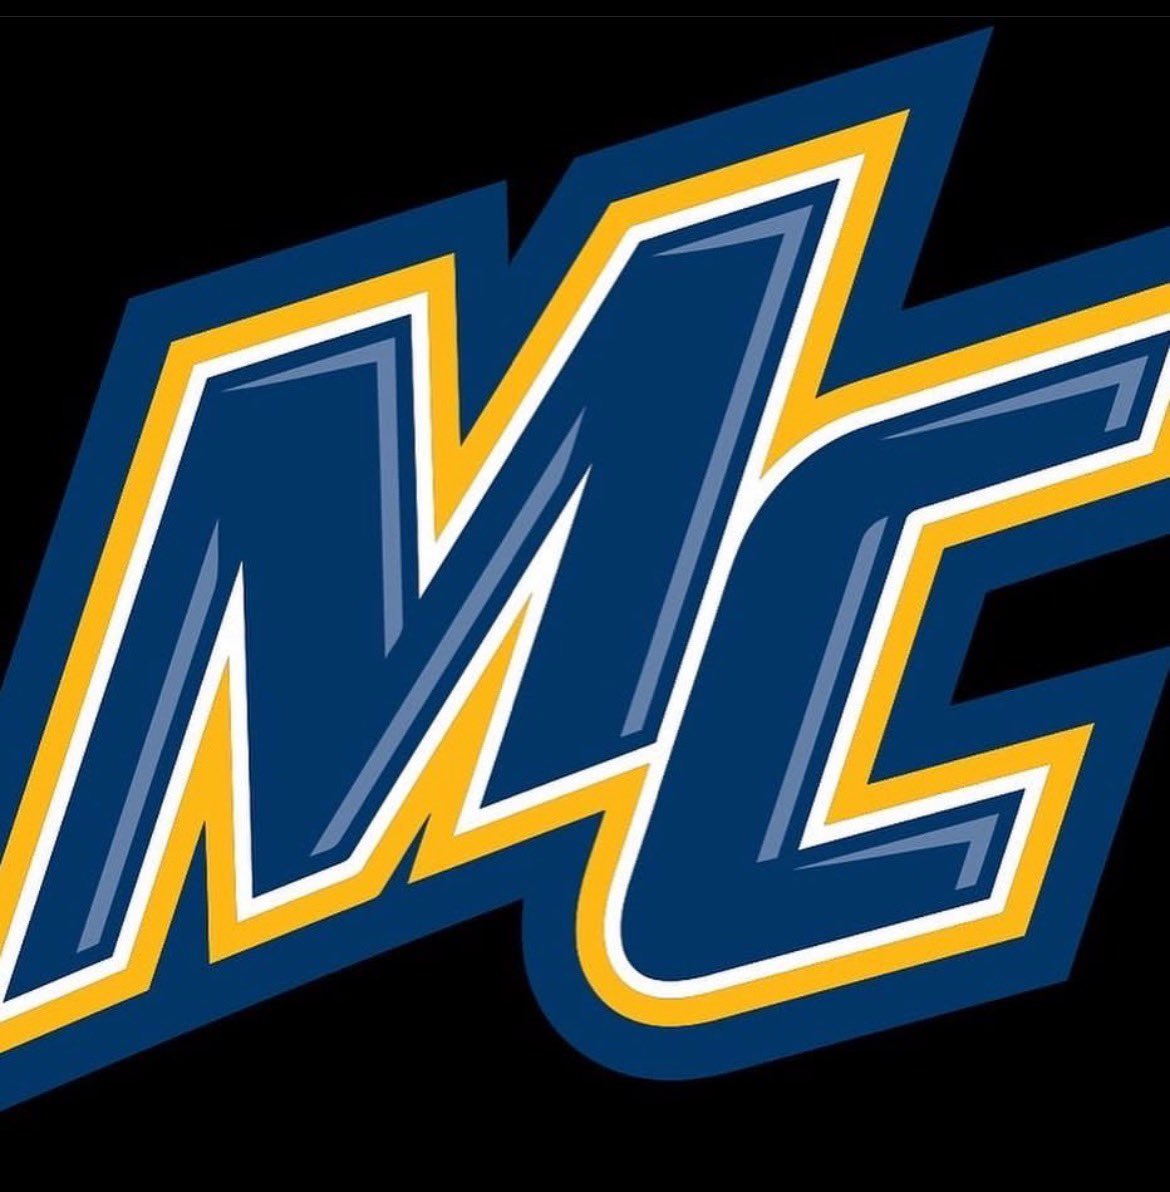 Blessed to receive an offer from Merrimack college @CoachDanCurran